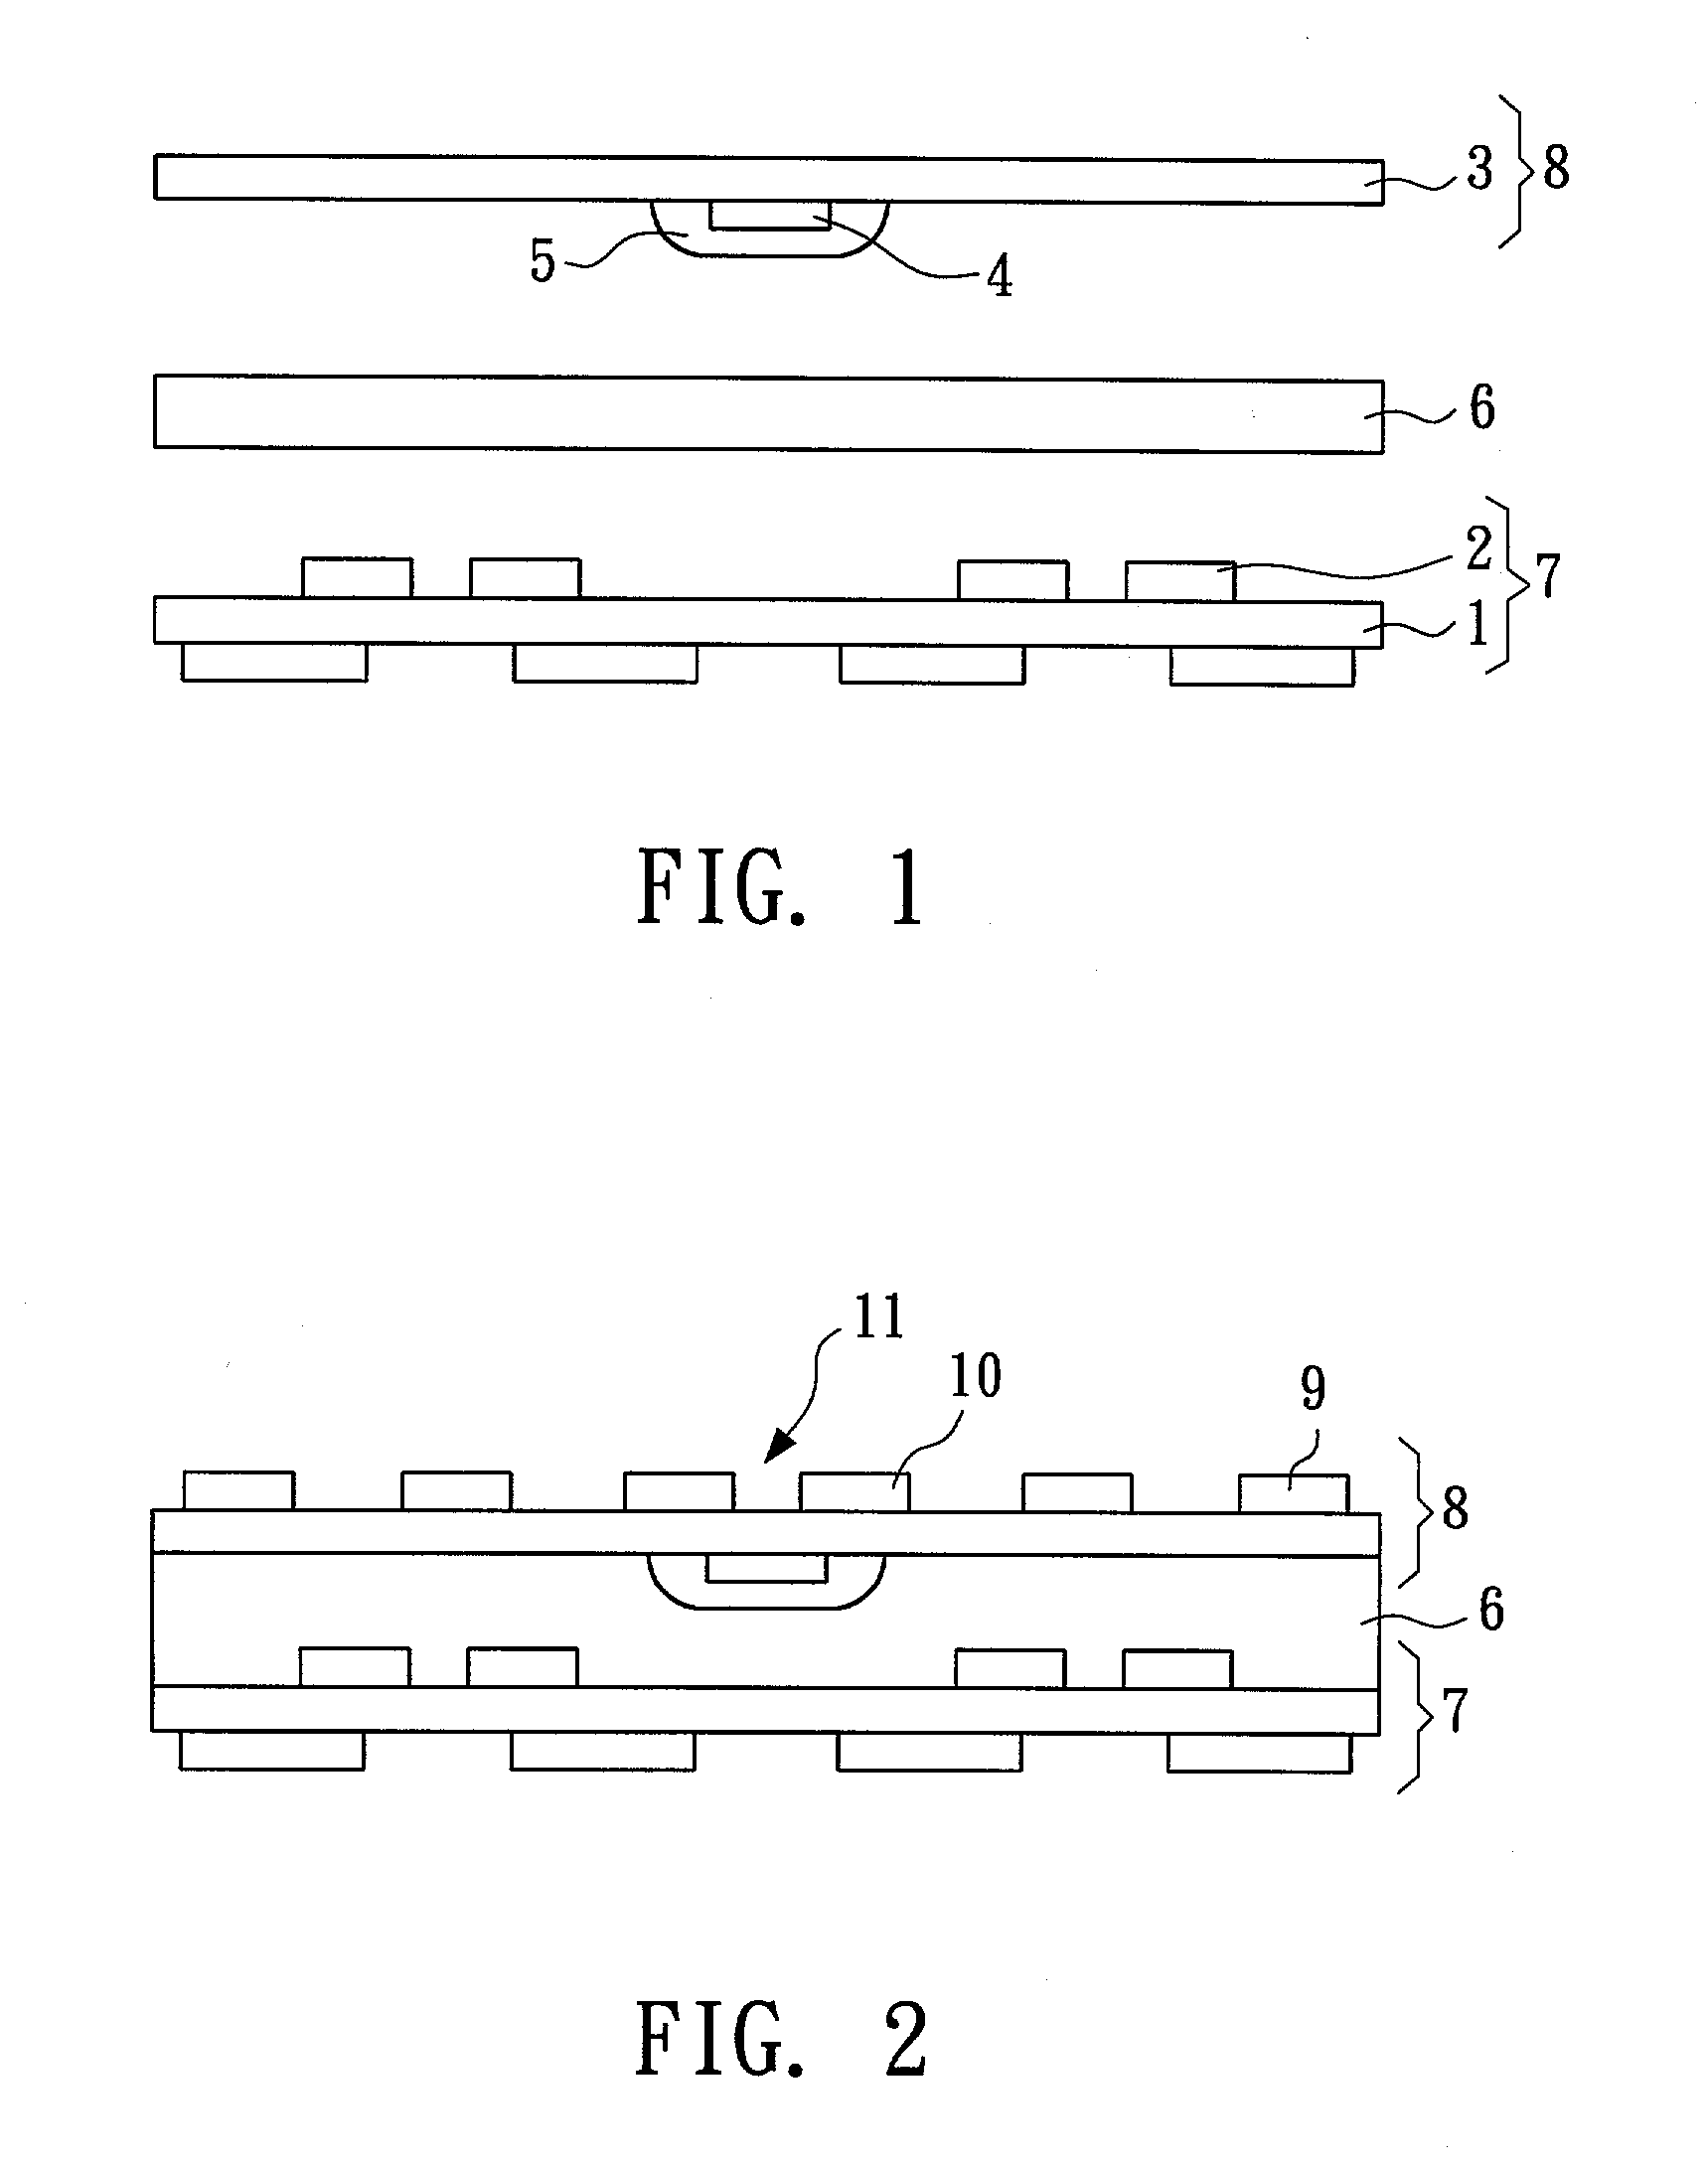 Lamination method of embedding passive components in an organic circuit board